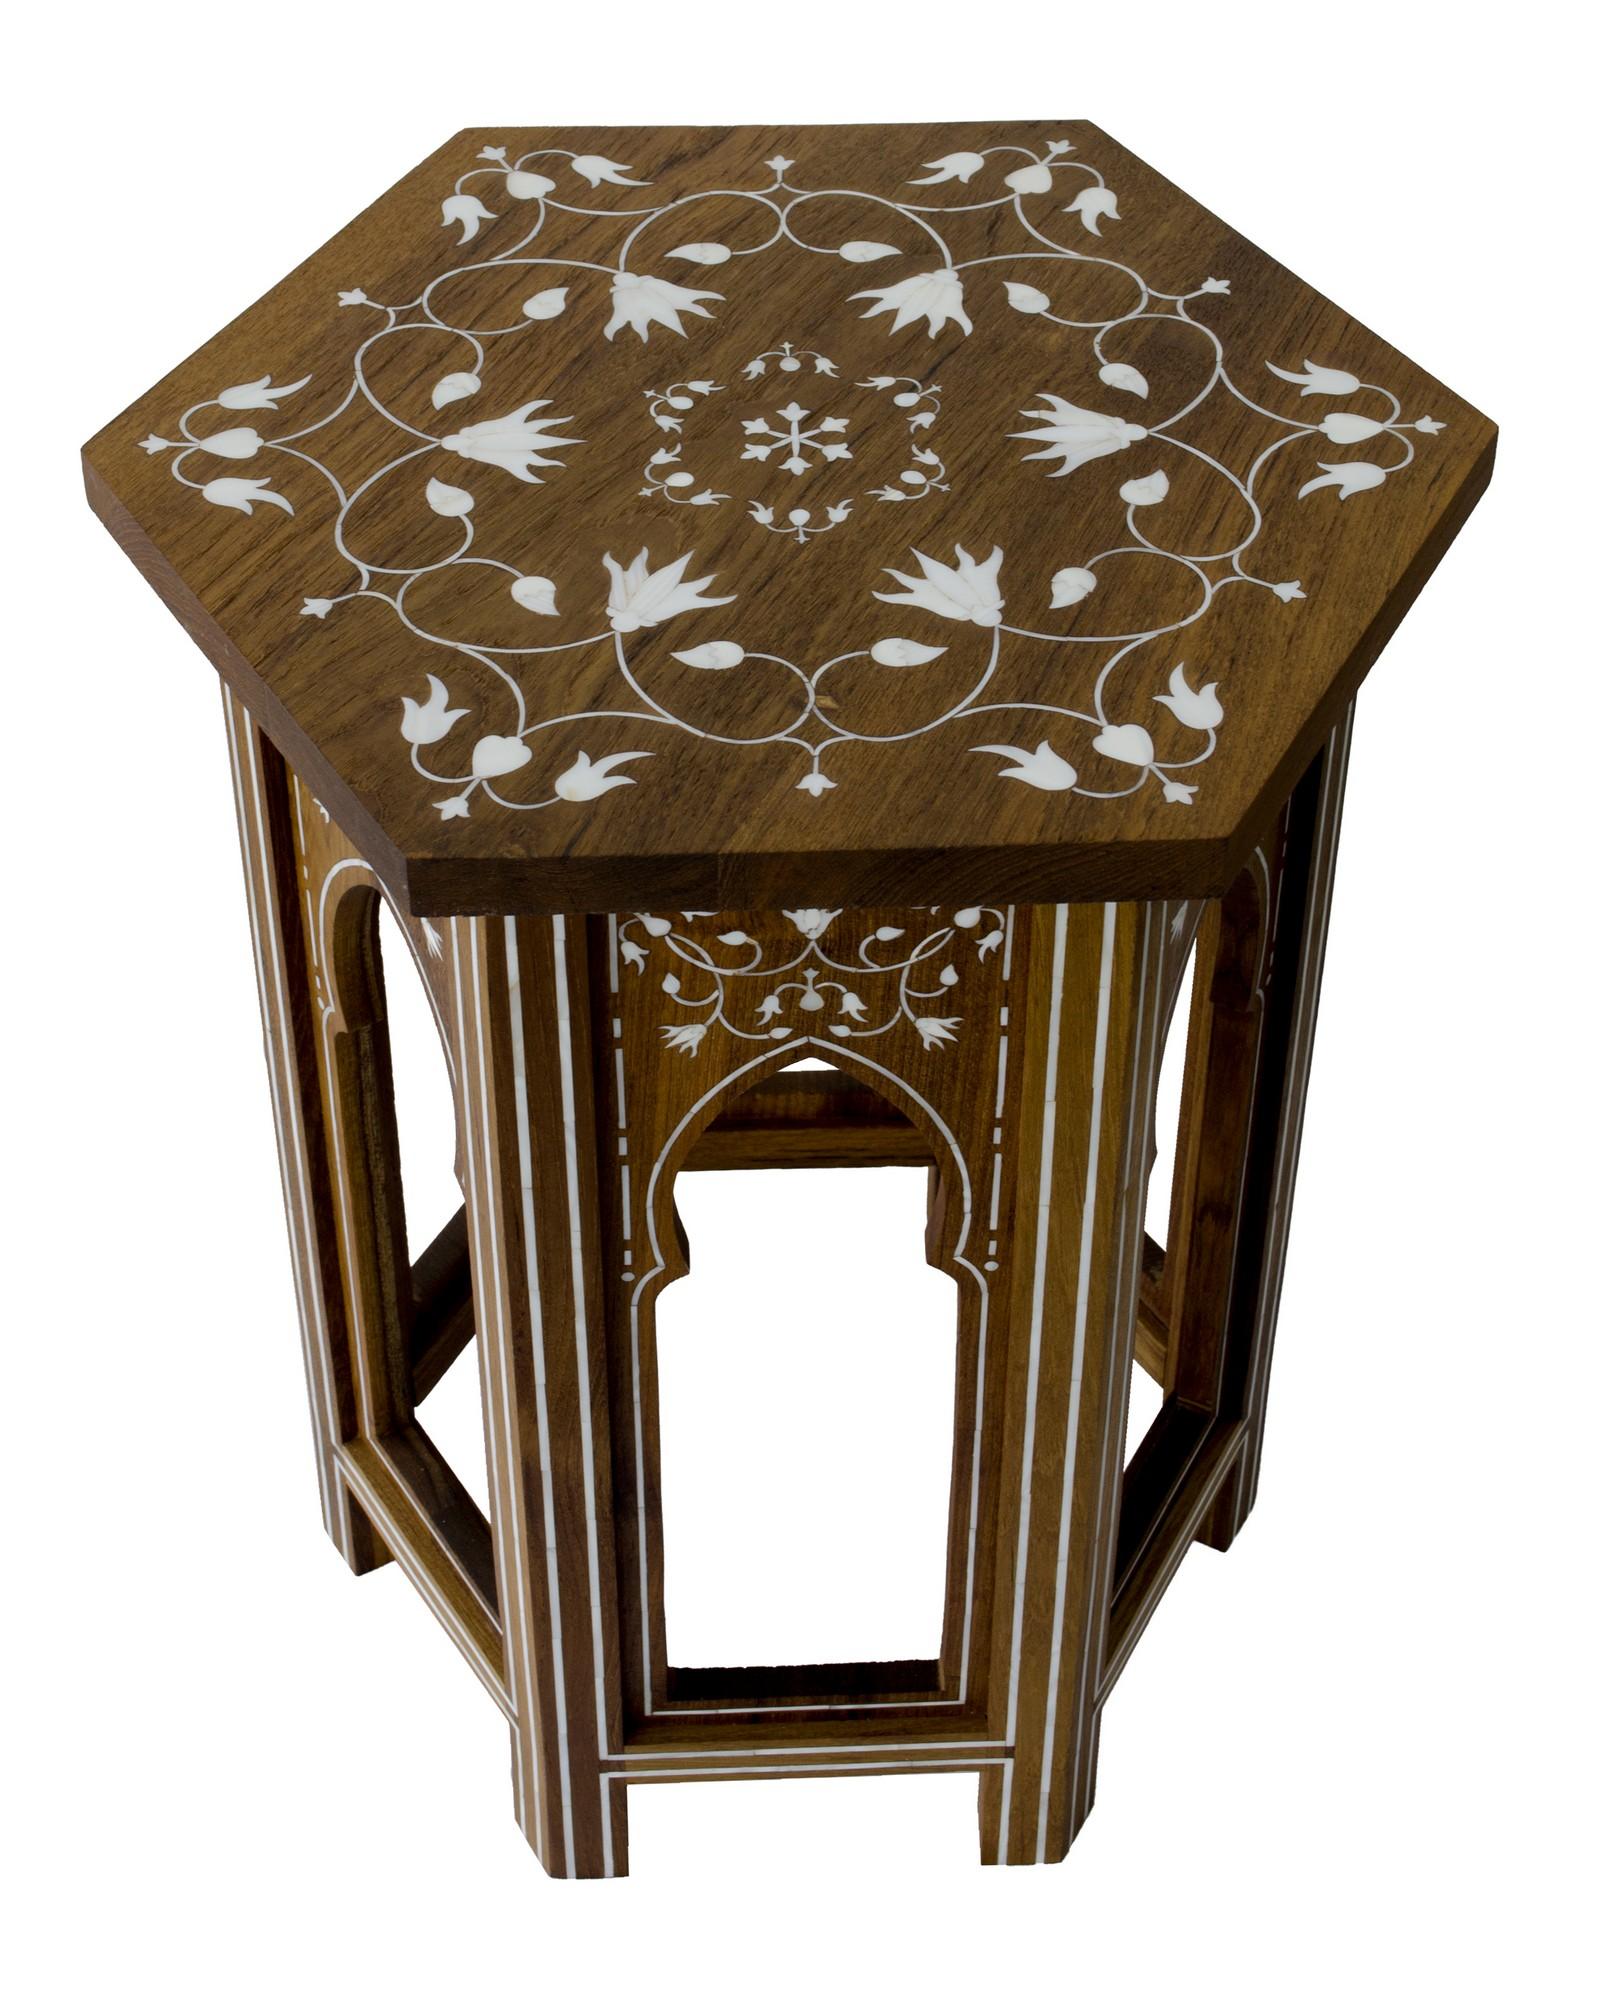 Inspired by the Mehraab element of Indian architecture, this simple design from Stephane Odegard's Udaipur Atelier, uses the intricate mother of pearl work on the top and the mehrabs on a hexagonal teak wood table.

Set of Two Mehraab Table in